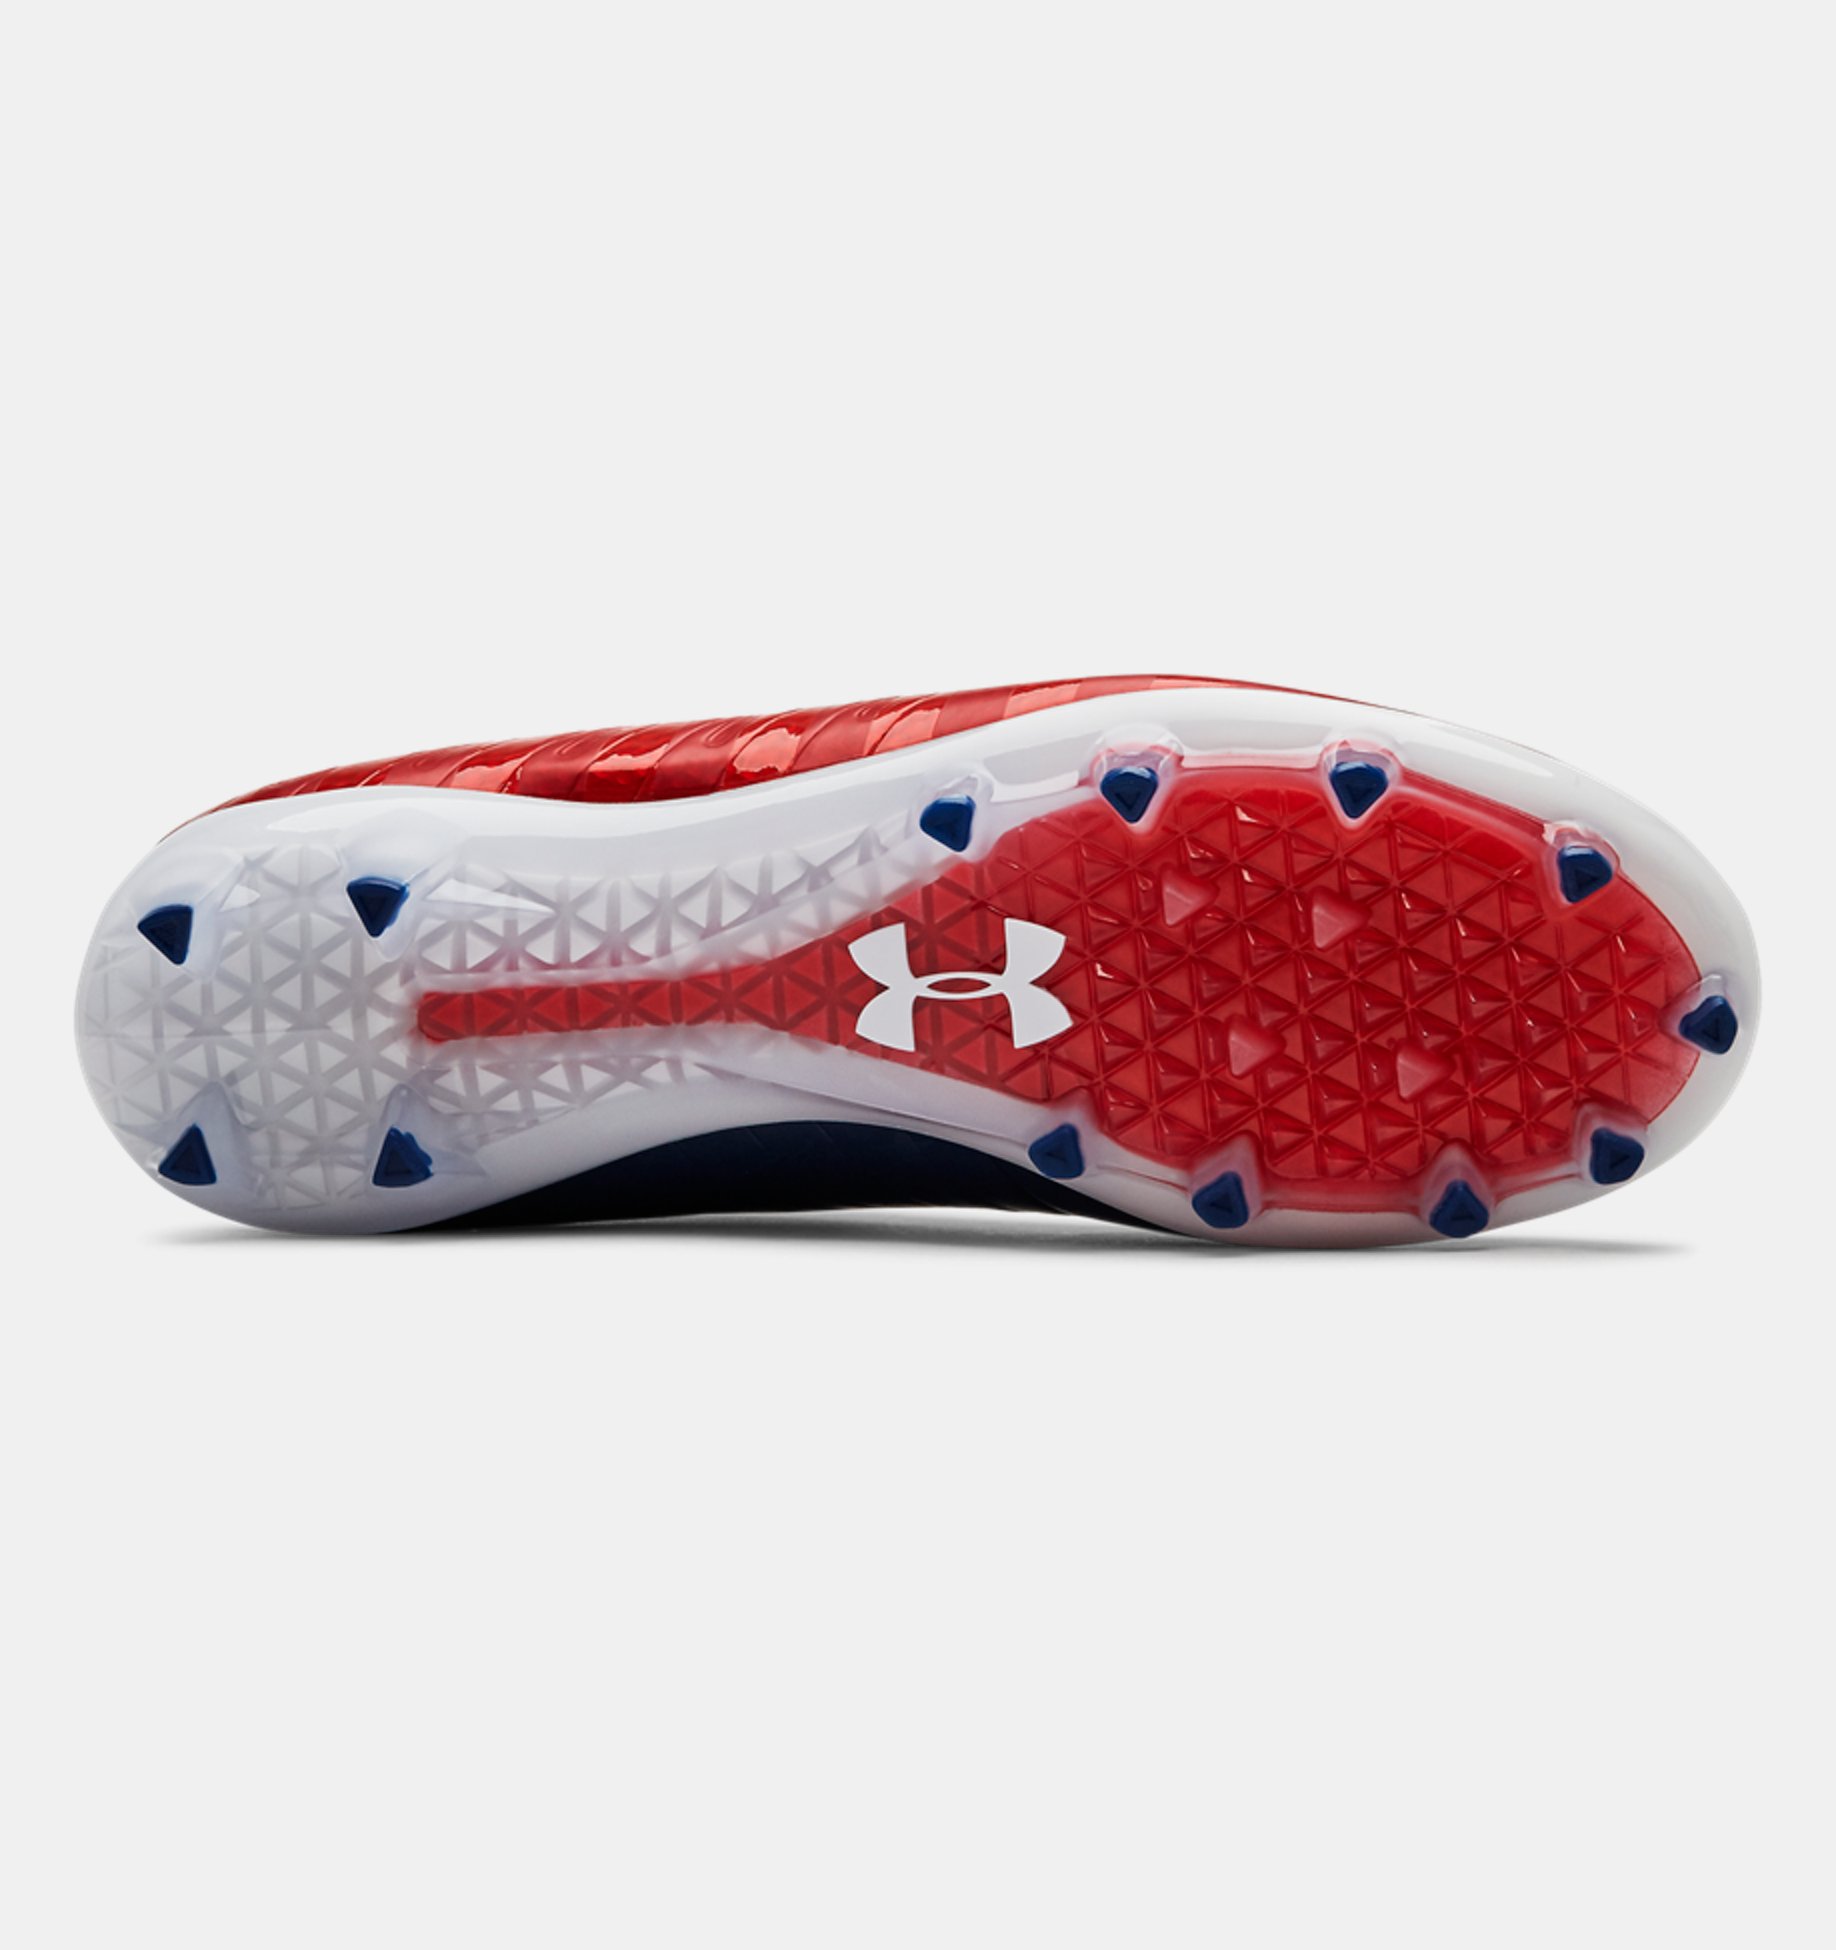 Under Armour Highlight MC Le Football Cleats 3021191 US Mens Size 13 Stars for sale online 